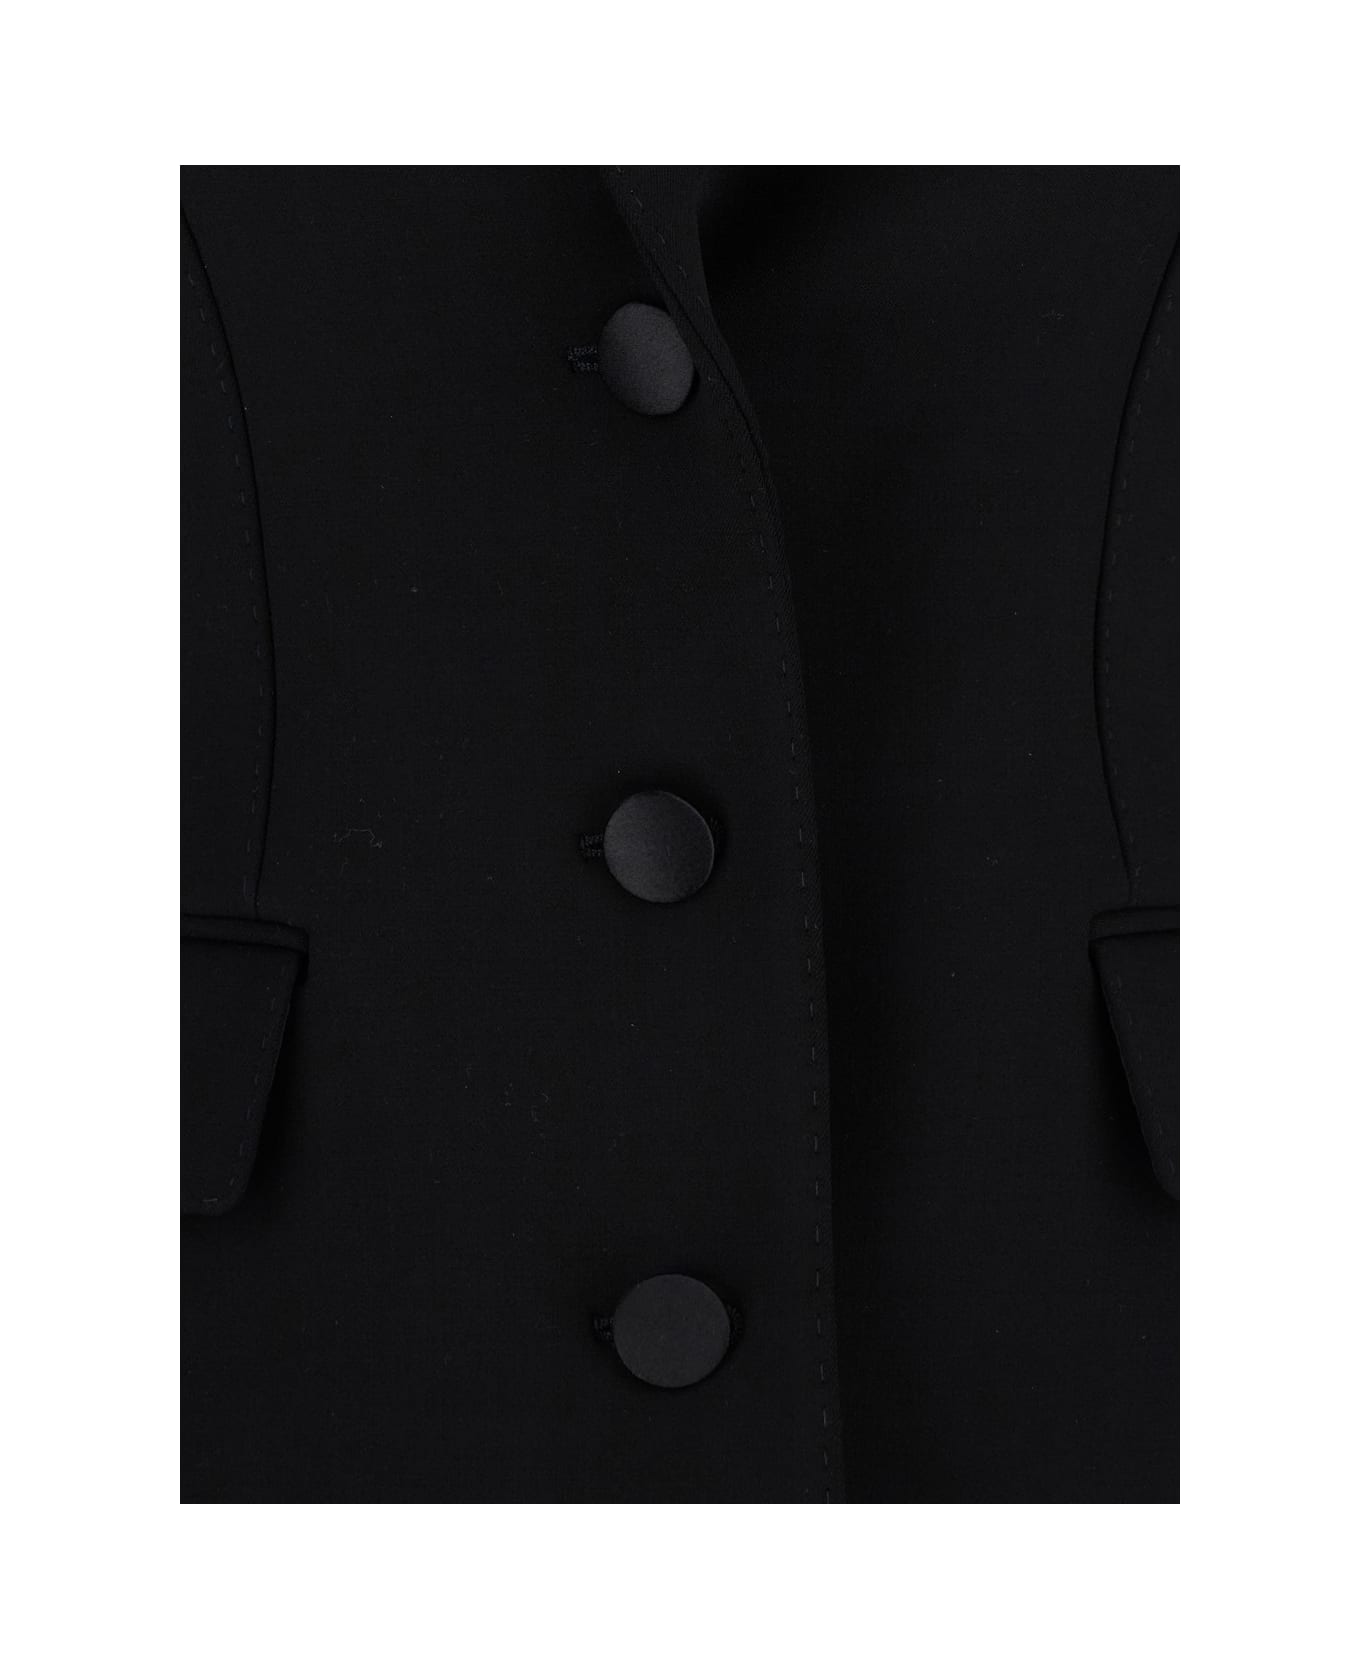 Dolce & Gabbana Black Single-breasted Jacket With Buttons Fastening In Wool Stretch Woman - Black